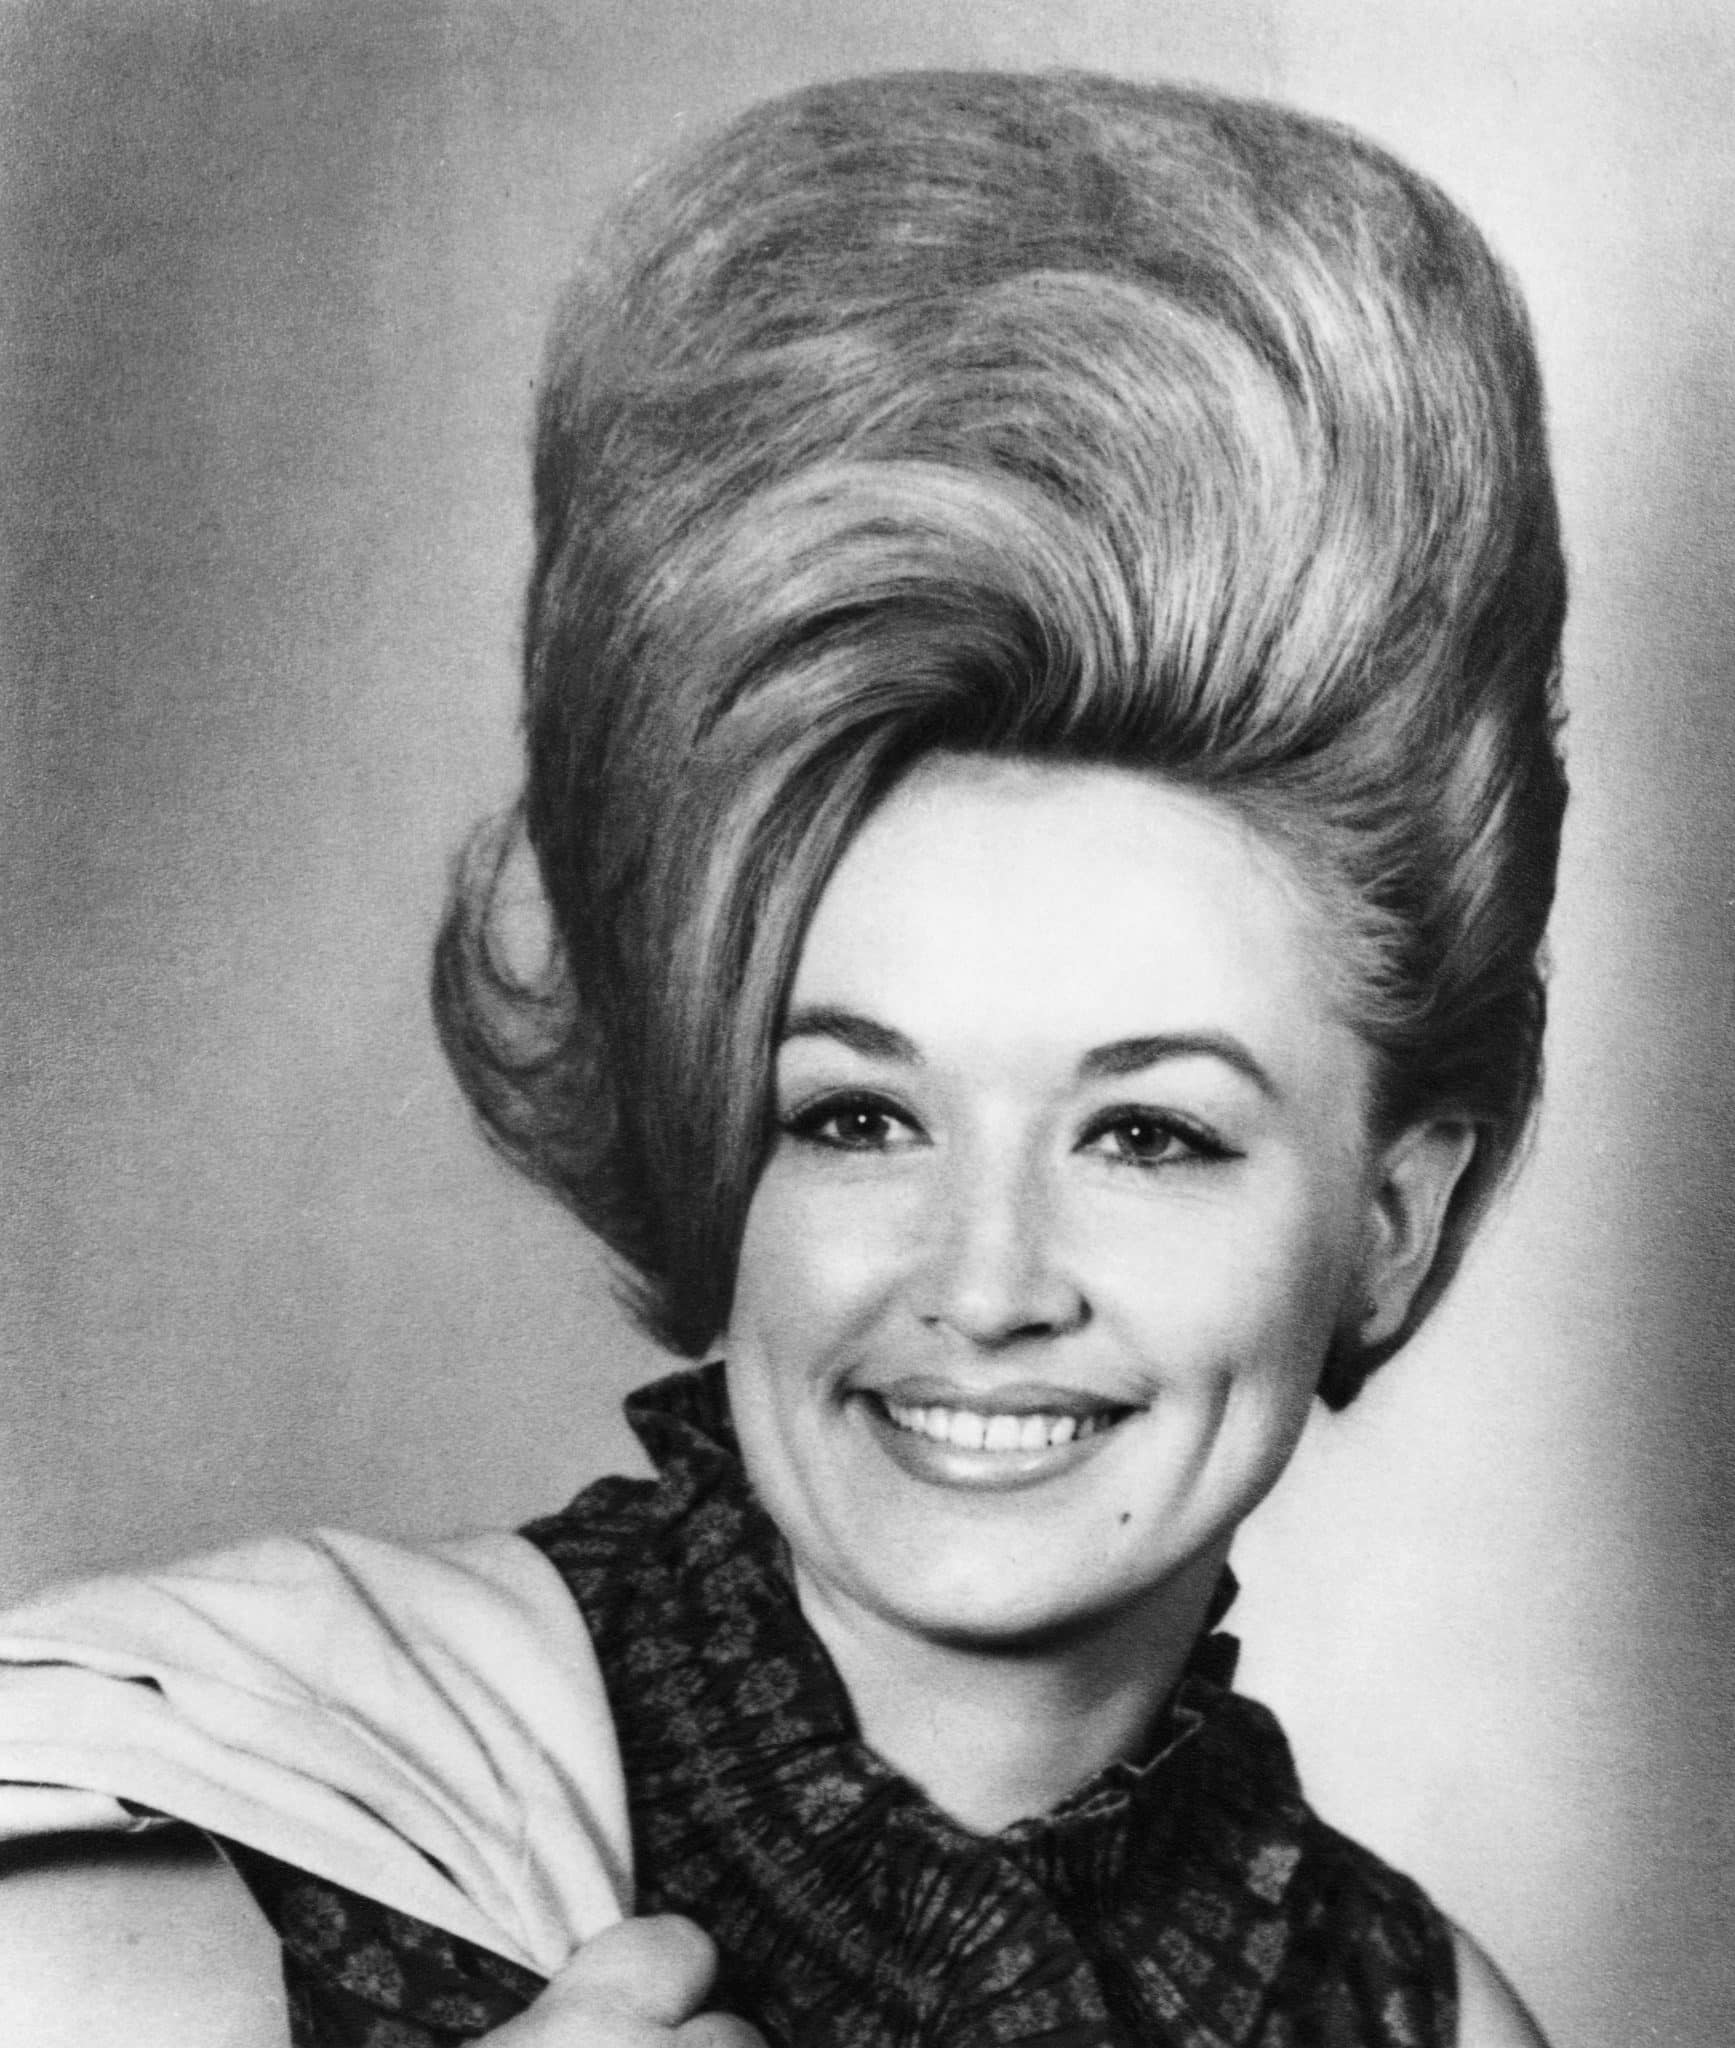 NASHVILLE - 1965:  Country singer Dolly Parton poses for a portrait in 1965 in Nashville, Tennessee. 